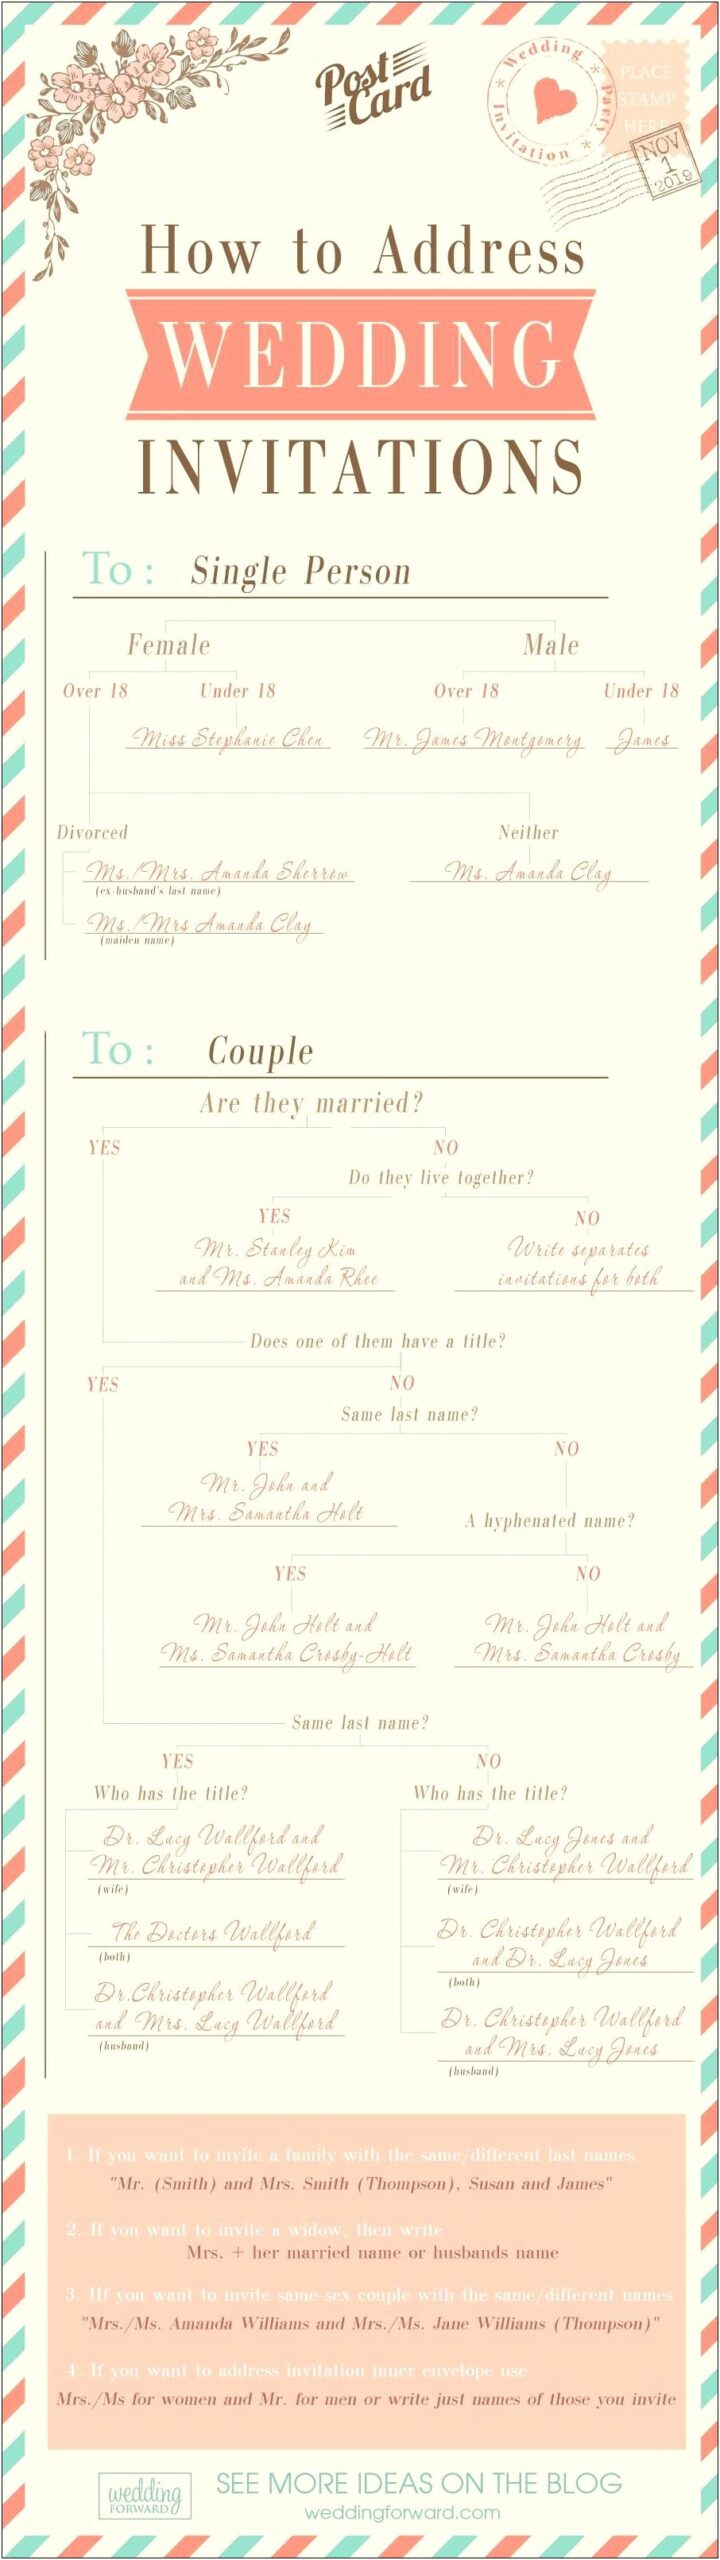 Etiquette For Addressing Wedding Invitations And Guest